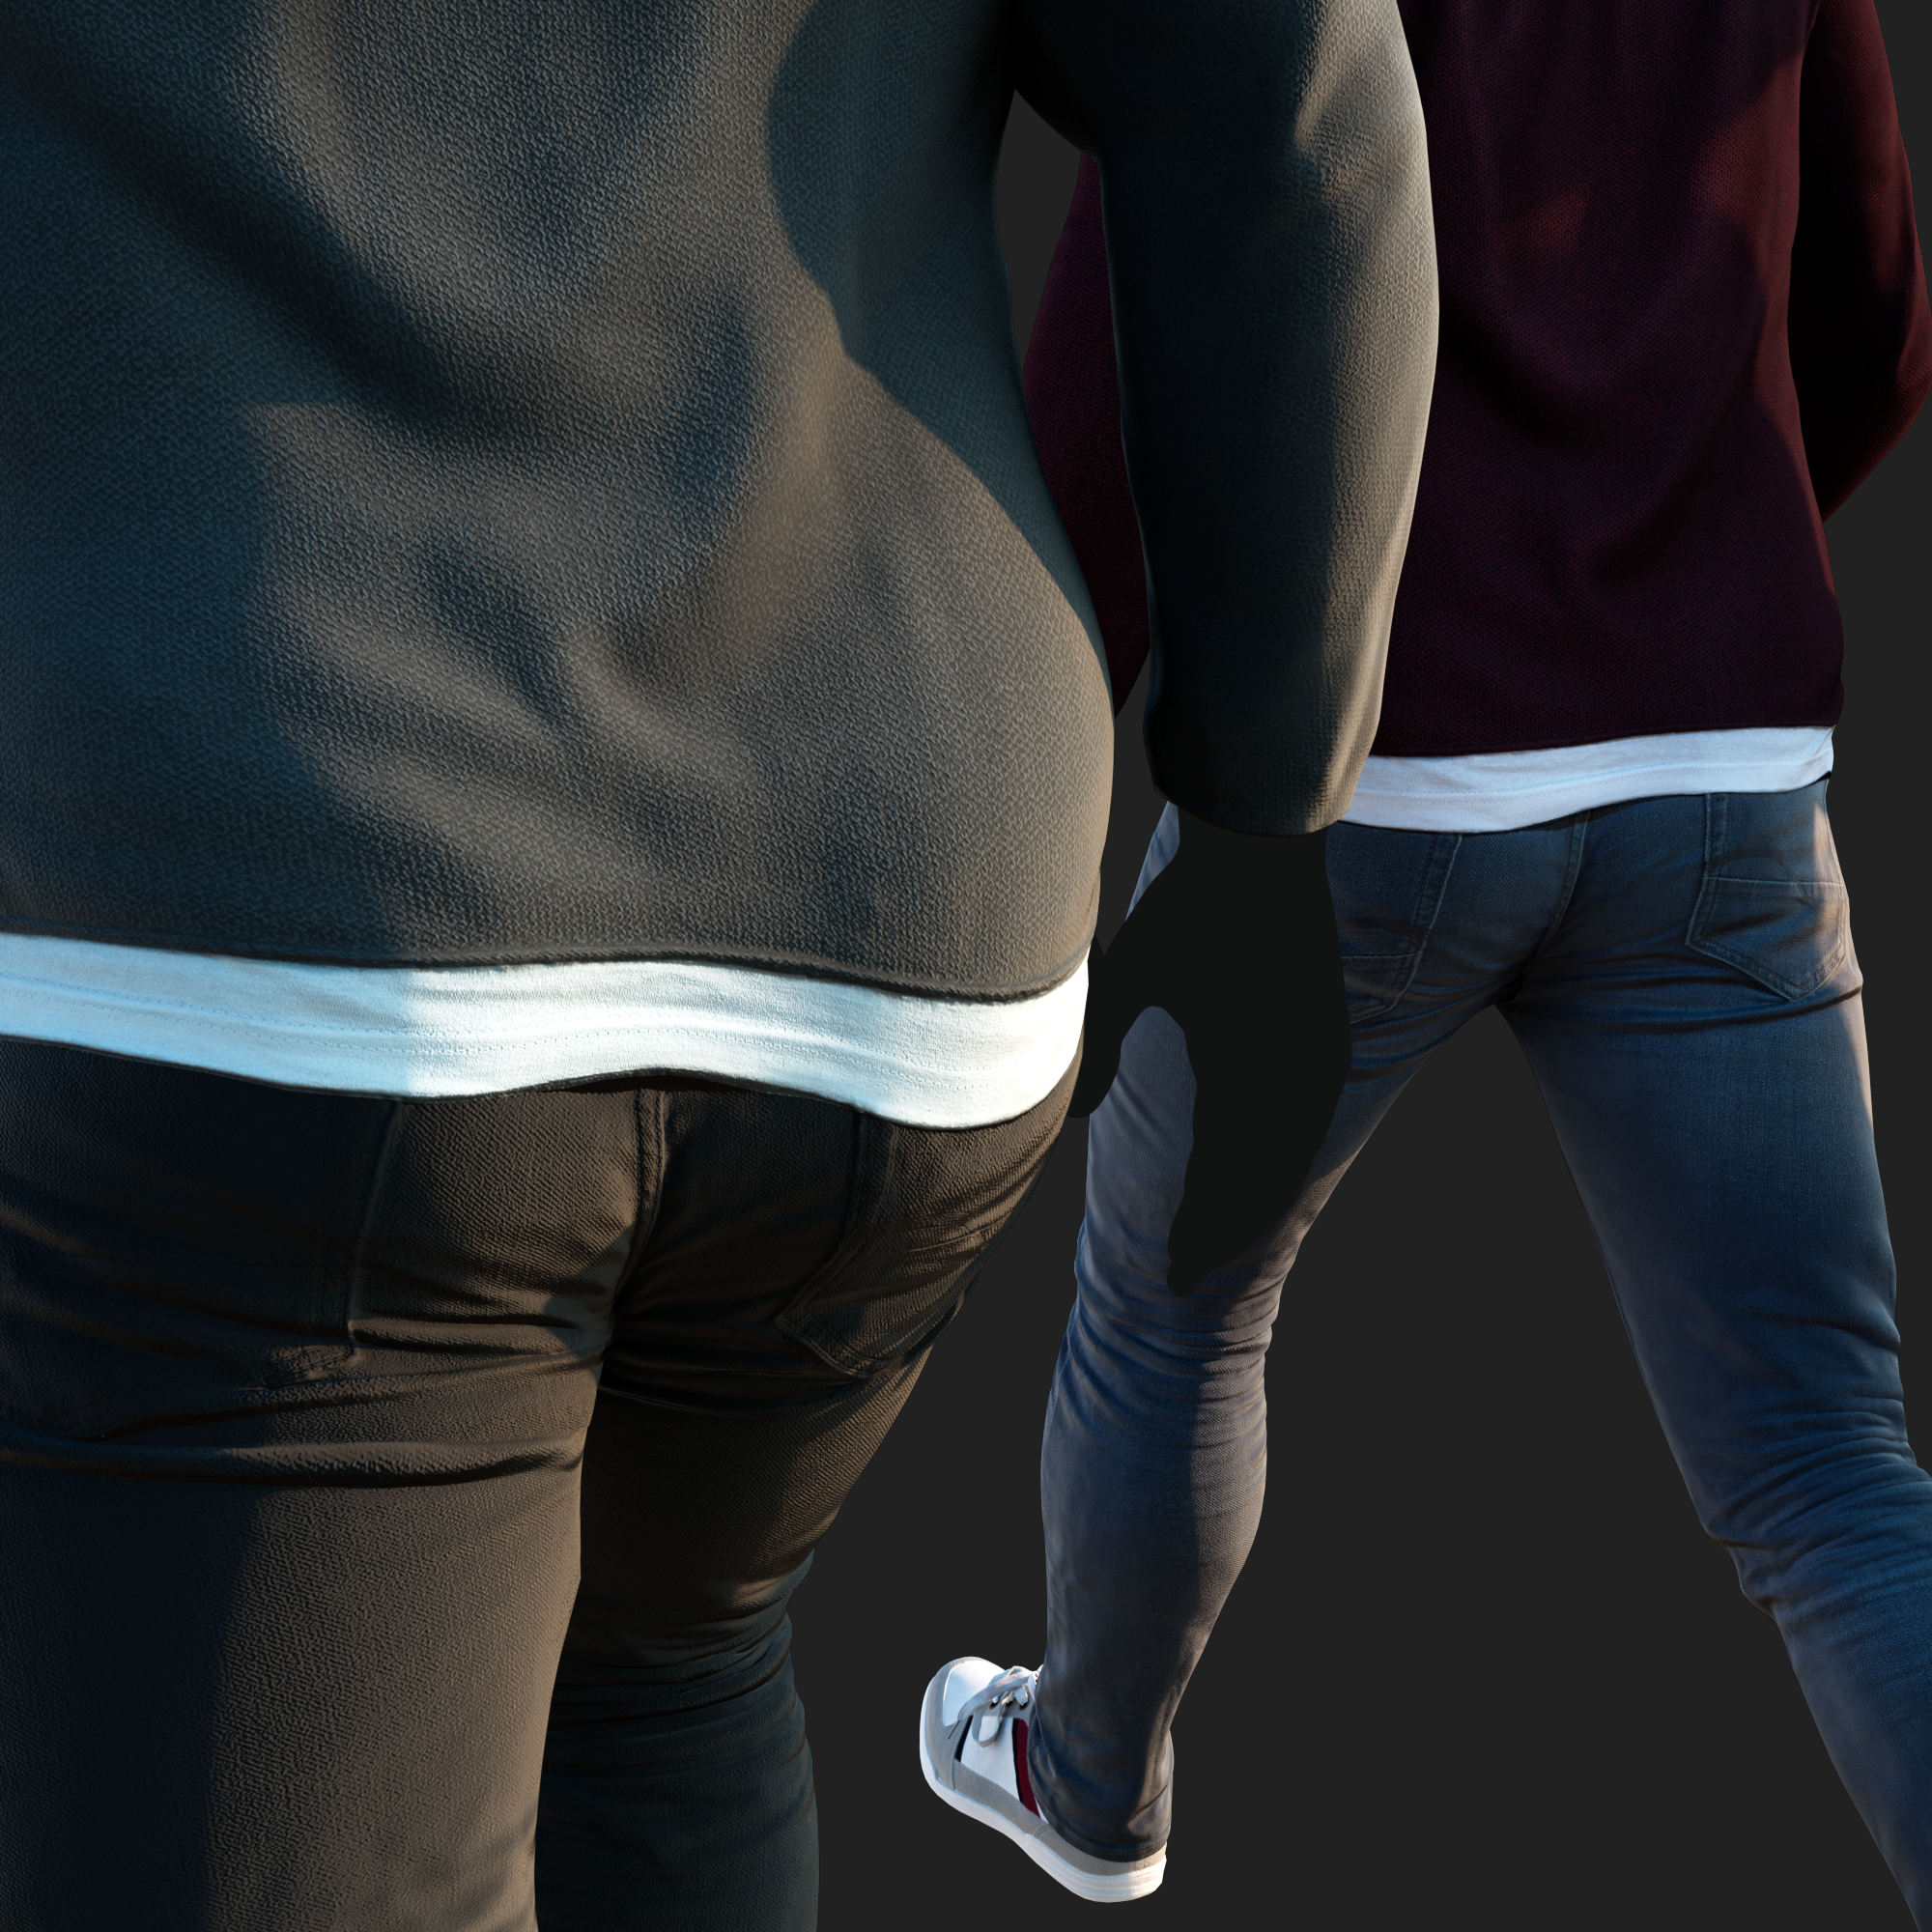 3D Clothing set of Sweater &amp; Jeans